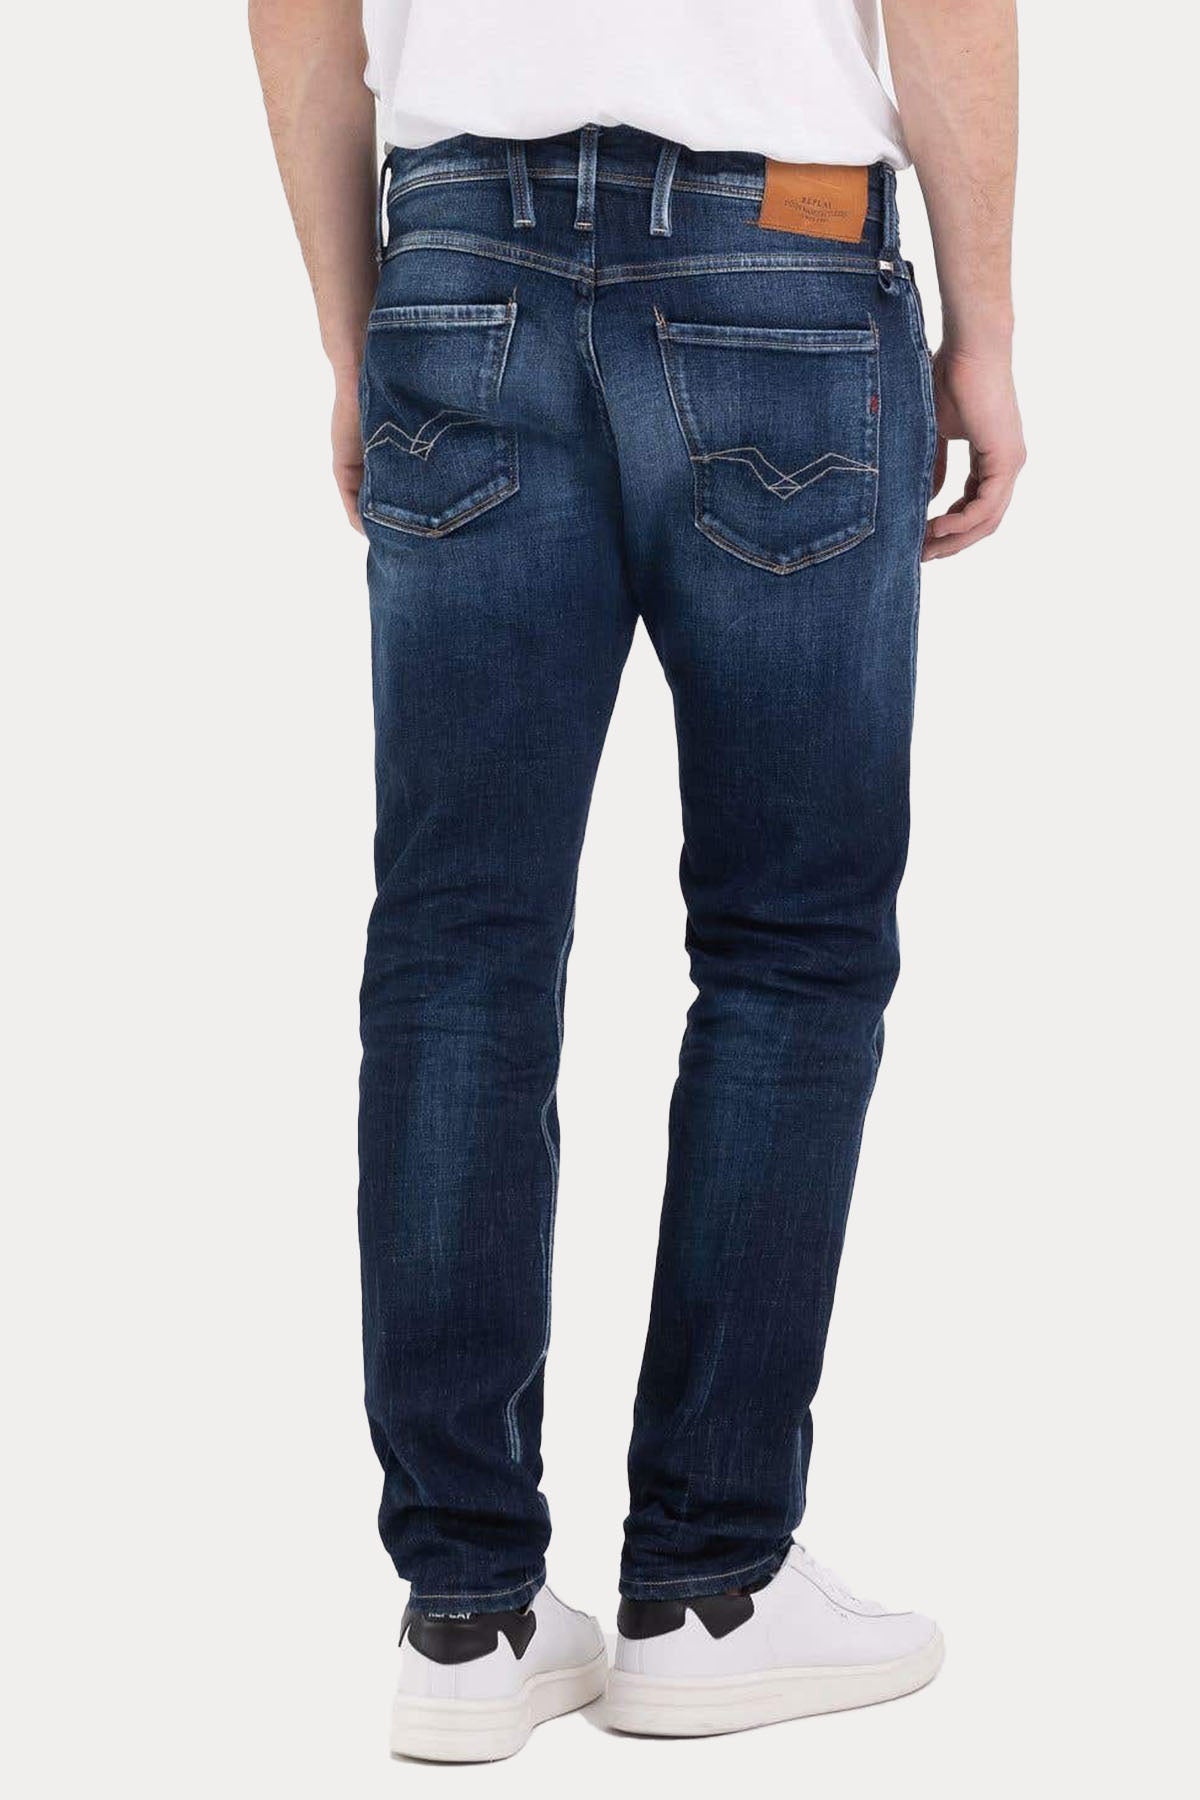 Replay Anbass Slim Fit Jeans-Libas Trendy Fashion Store